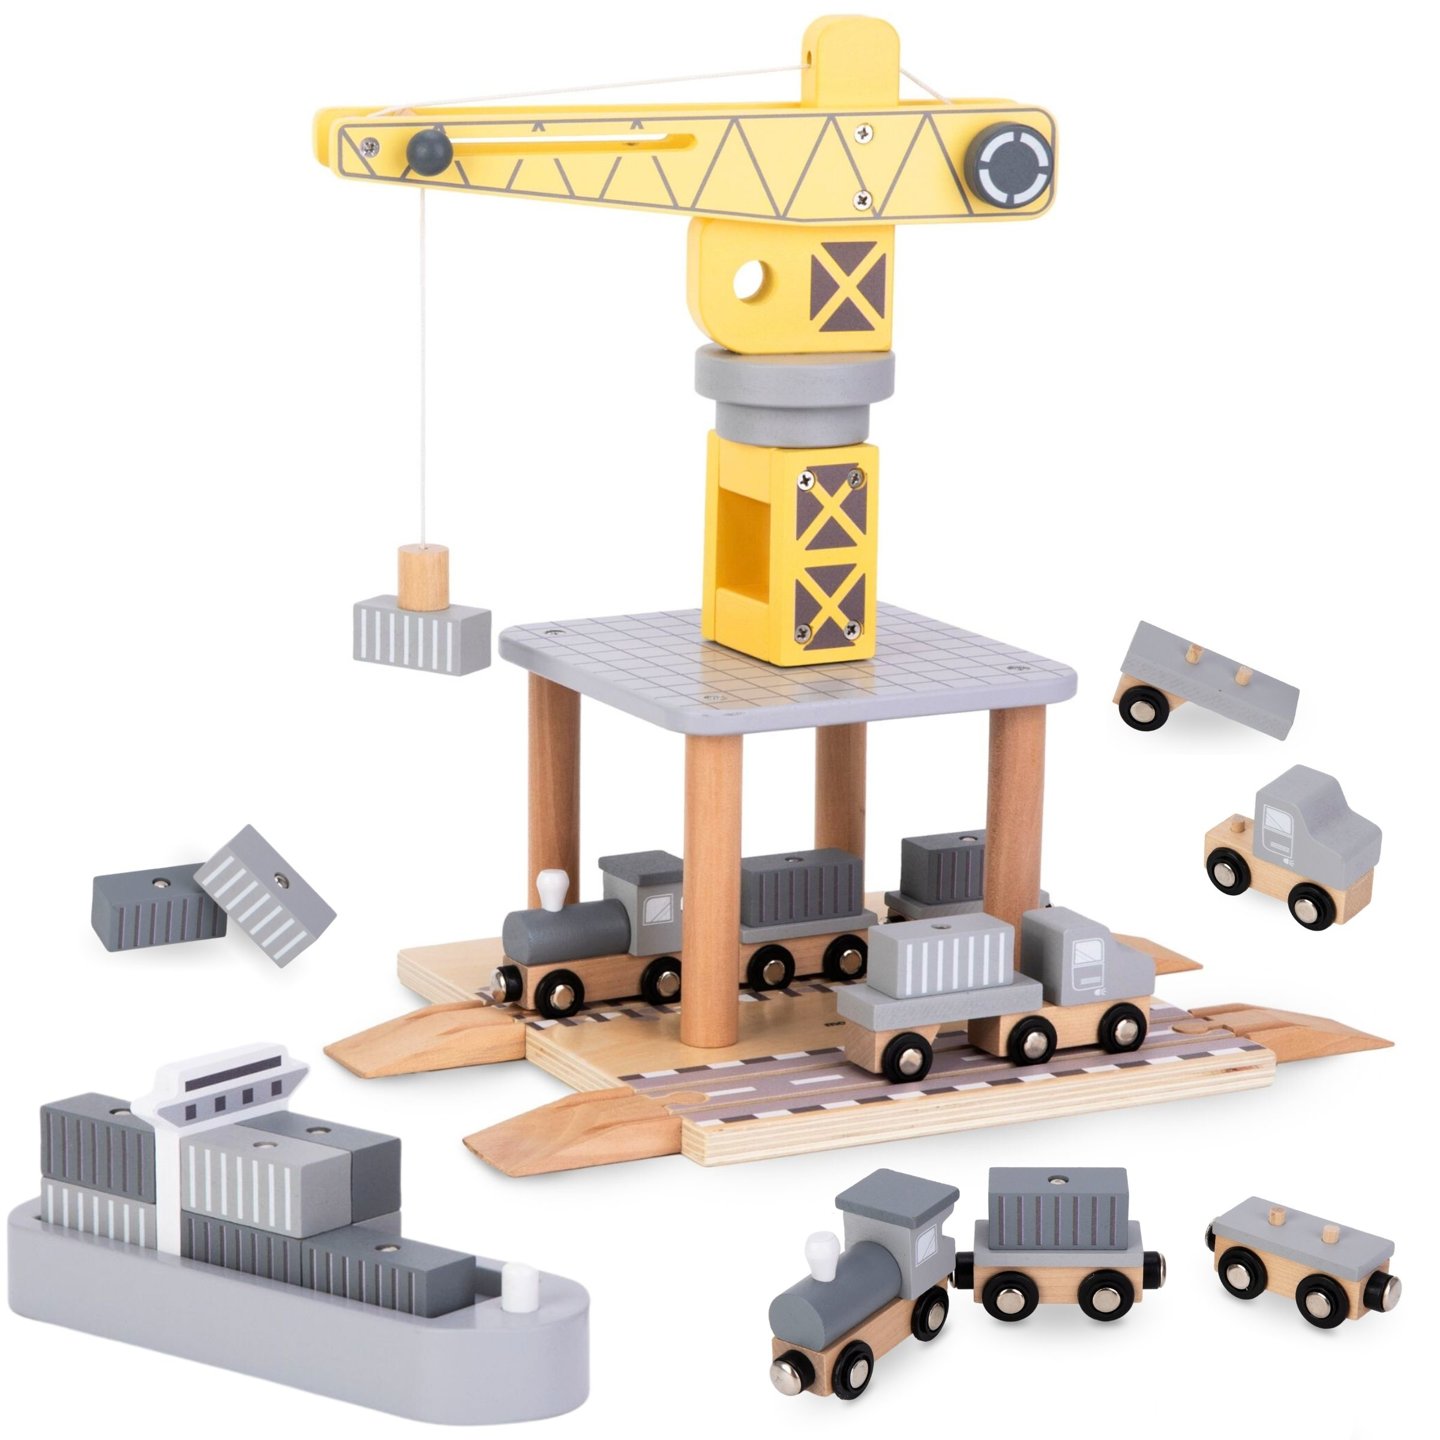 Mobile harbor crane with magnetic winch and accessories - wooden set